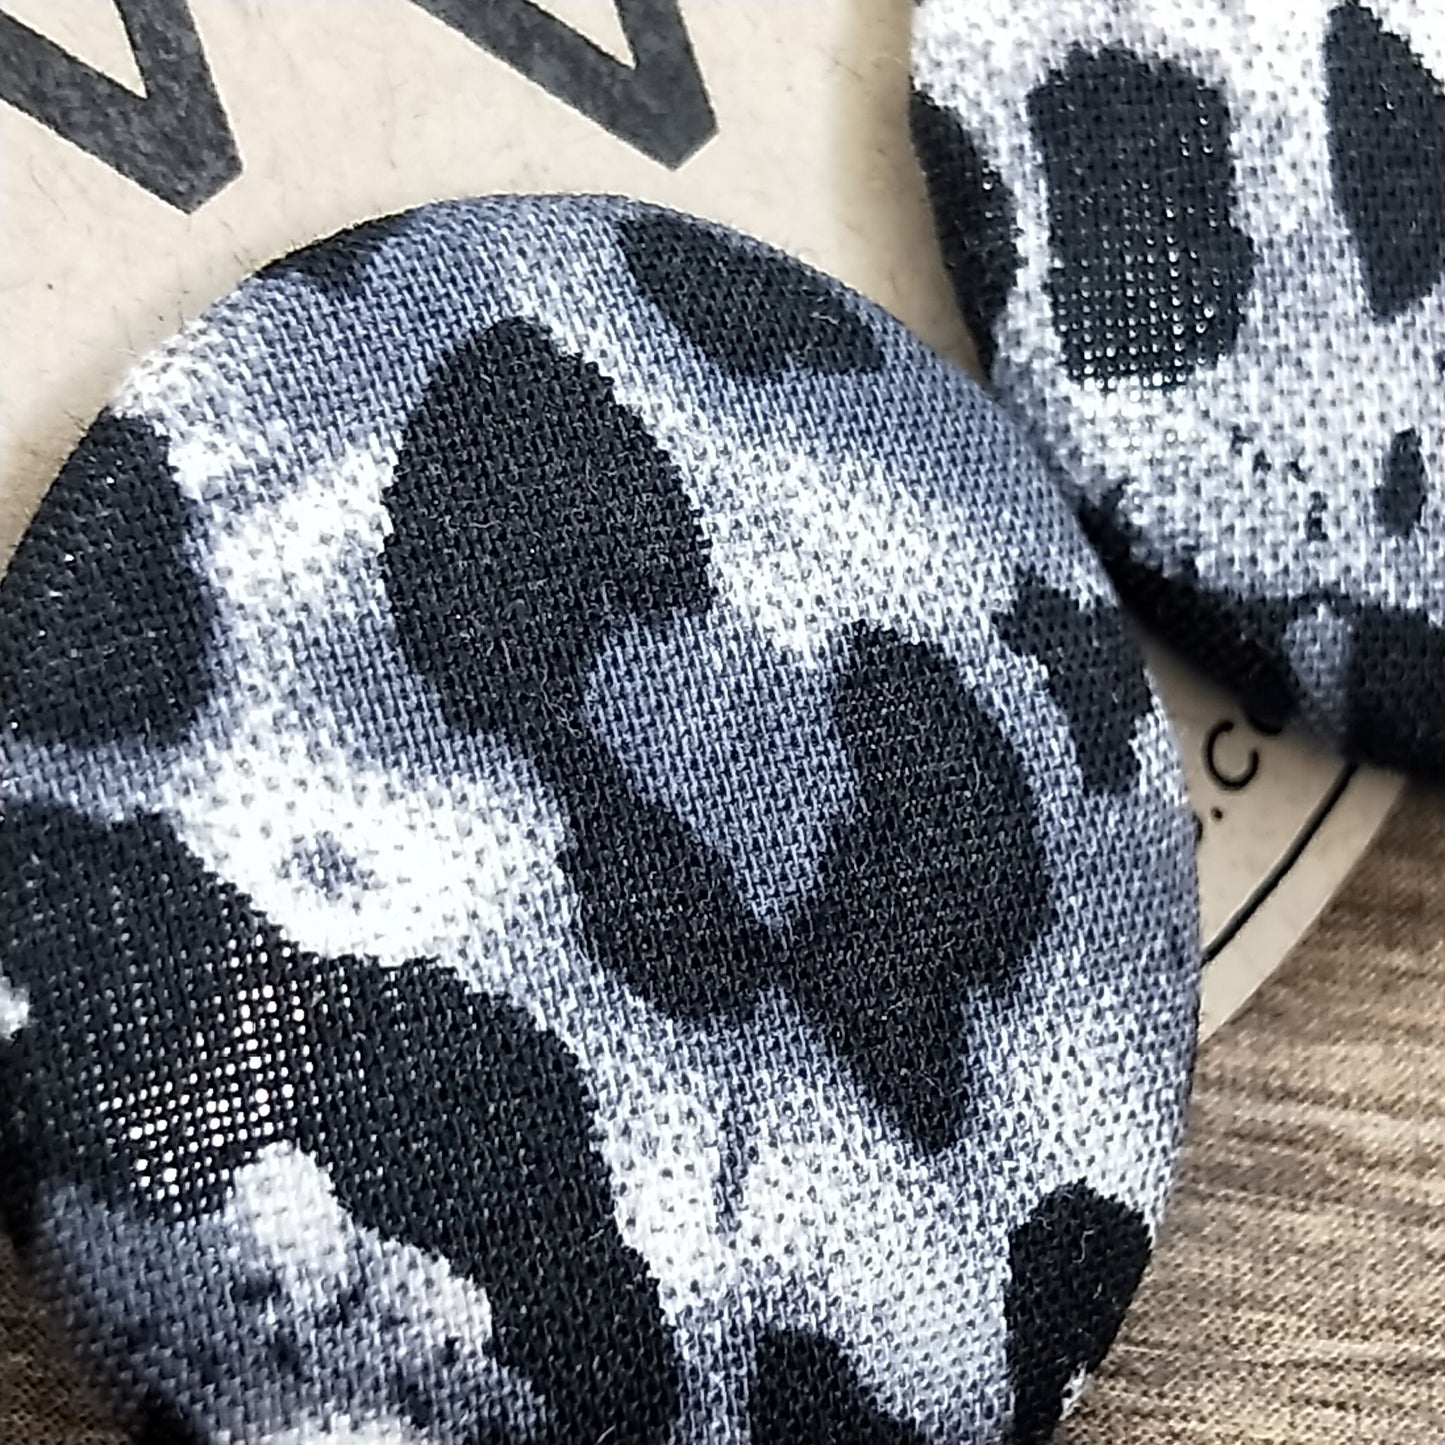 Wildears Fabric Covered Button Earrings Black White Leopard 27mm